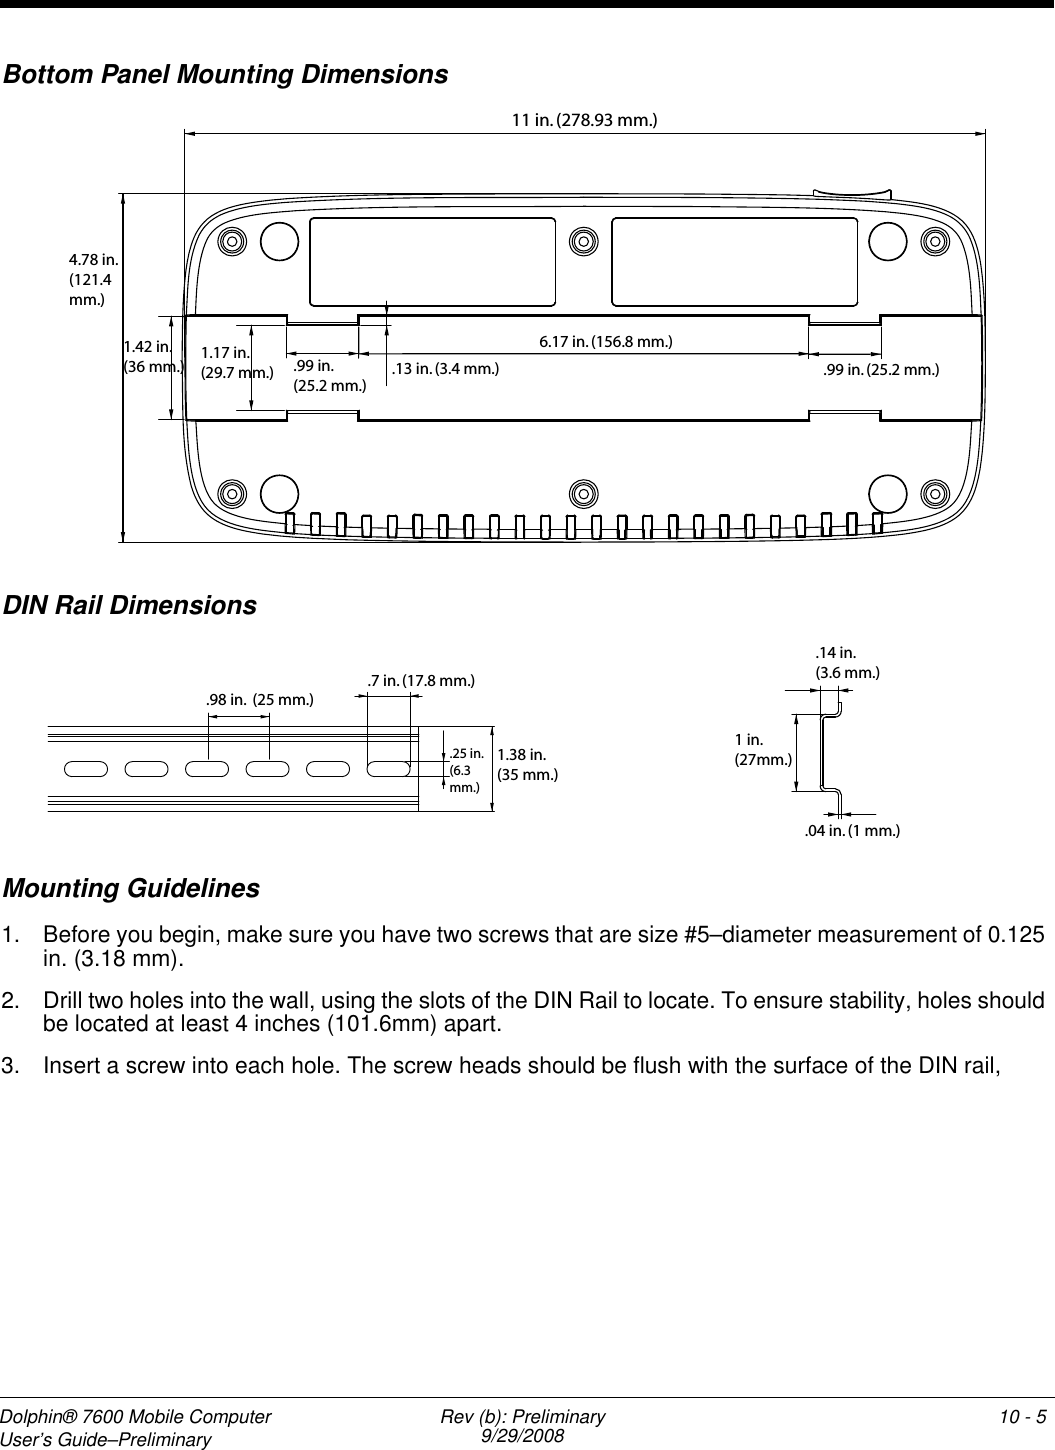 Dolphin® 7600 Mobile Computer User’s Guide–Preliminary Rev (b): Preliminary9/29/2008 10 - 3Battery ChargingInserting and Removing Battery Packs To insert a battery pack, place the end of the battery without the locking tab into the bottom of the charging pocket and snap the battery into place with a hinging motion. To remove a battery pack, push the locking tab down and pull the battery away from the charging slot with a hinging motion.Charging ProcessThe QuadCharger device charges Li-ion battery packs in four hours. Each charging slot works independently of the other three. As battery packs charge, the charging circuitry follows the two-step charging process (CC-CV) that is recommended for Li-Ion batteries. The process monitors changes in temperature, current, and voltage. TemperatureThe QuadCharger device charges Li-ion battery packs in four hours when charged within the recommended temperature range of 50° to 95° F (10° to 35°C). Temperature has a significant effect on charging. For best results, battery packs should be at room temperature before inserting in the QuadCharger device. When the battery temperature exceeds 40°C, the QuadCharger device may exceed the stated four-hour charge time. The QuadCharger device stops charging if the battery temperature is greater than 40°C but will begin charging again when the battery temperature is less than 40°C.To Charge Batteries1. Supply the QuadCharger device with power and turn the power switch on.2. Insert batteries into the appropriate slots. The Status LED for each slot turns orange to indicate that the battery is properly seated and has begun a charge cycle.3. When the Status LED turns green, the battery in the slot has completed charging.Recommendations for Storing BatteriesTo maintain top performance from batteries, follow these storage guidelines:• Avoid storing batteries outside of the specified temperature range of -4 to 122° F (-20 to 50°C) or in extremely high humidity.• For prolonged storage, do not keep batteries stored in a charger that is connected to a power source. !